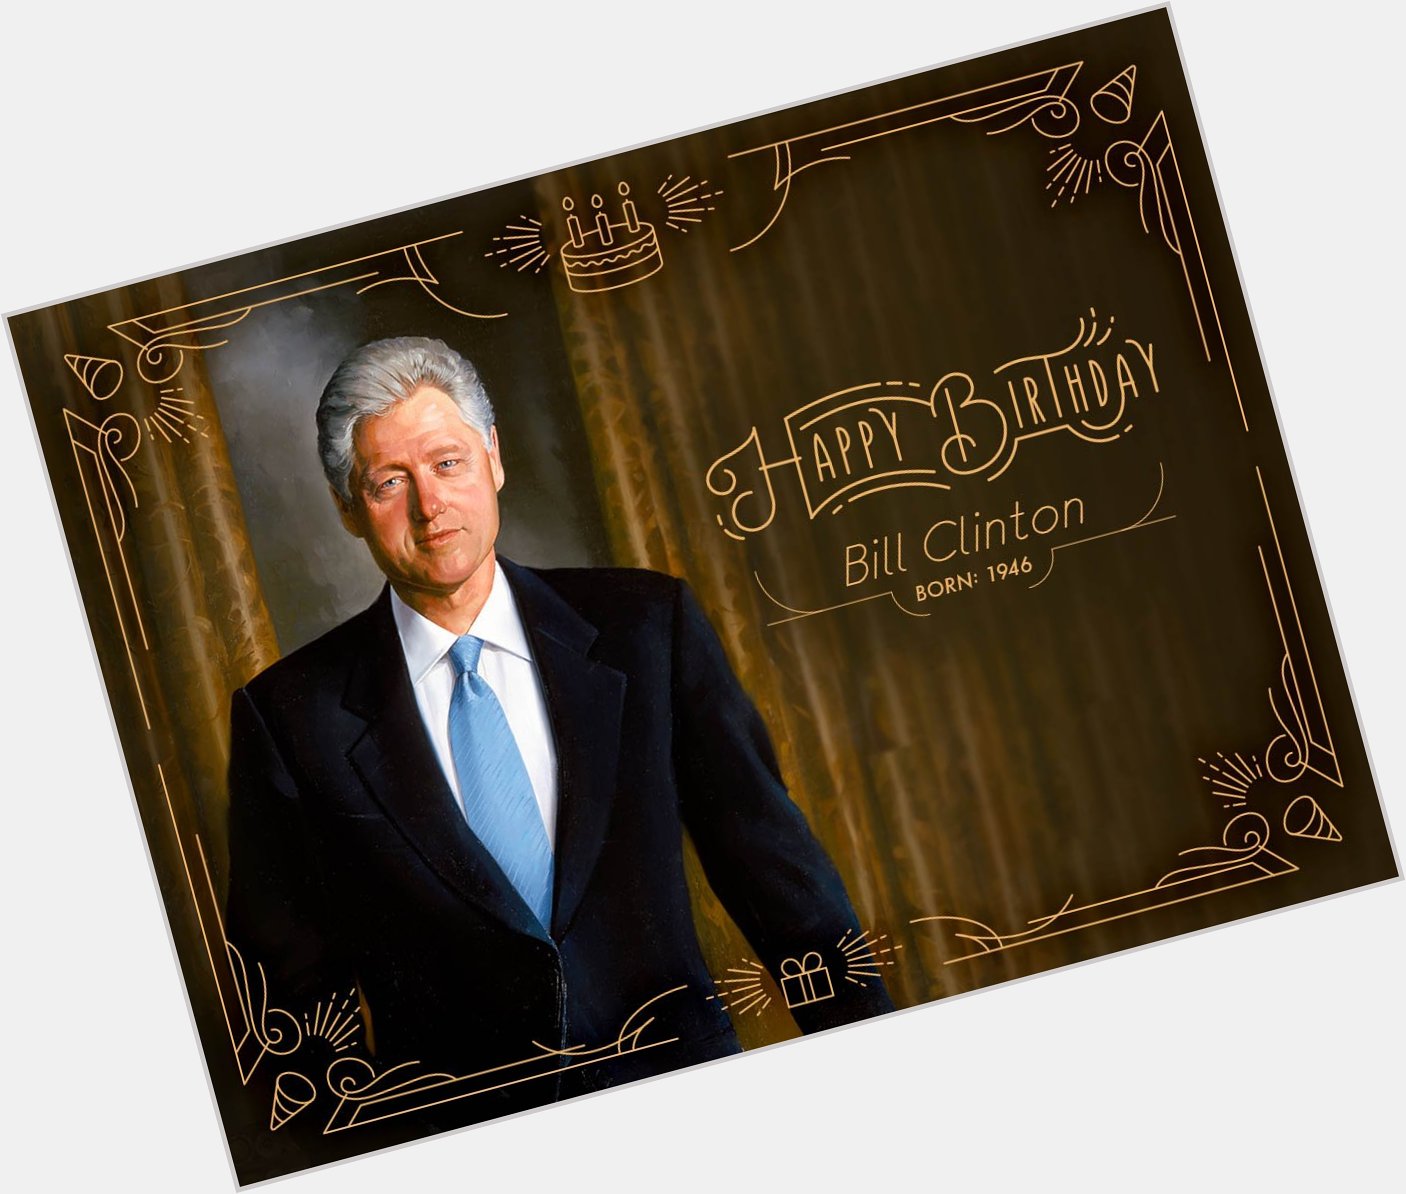 Happy birthday to our 42nd president, Bill Clinton (1993-2001) born on this day in 1946.  